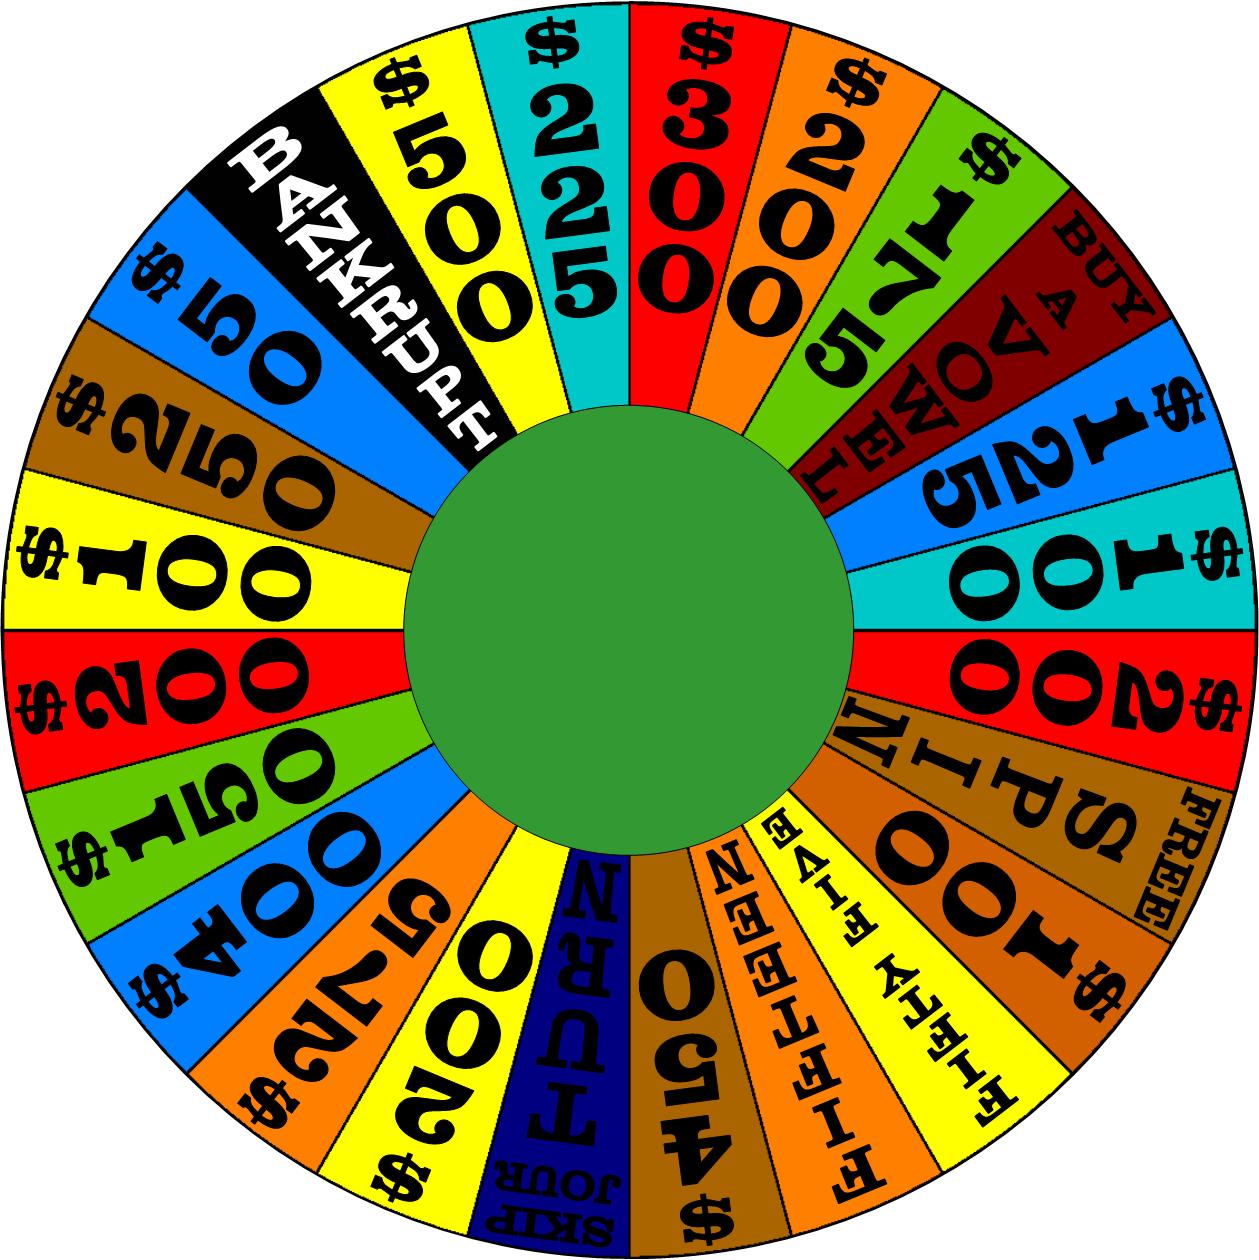 Bizarre 1970s Wheel of Fortune by germanname